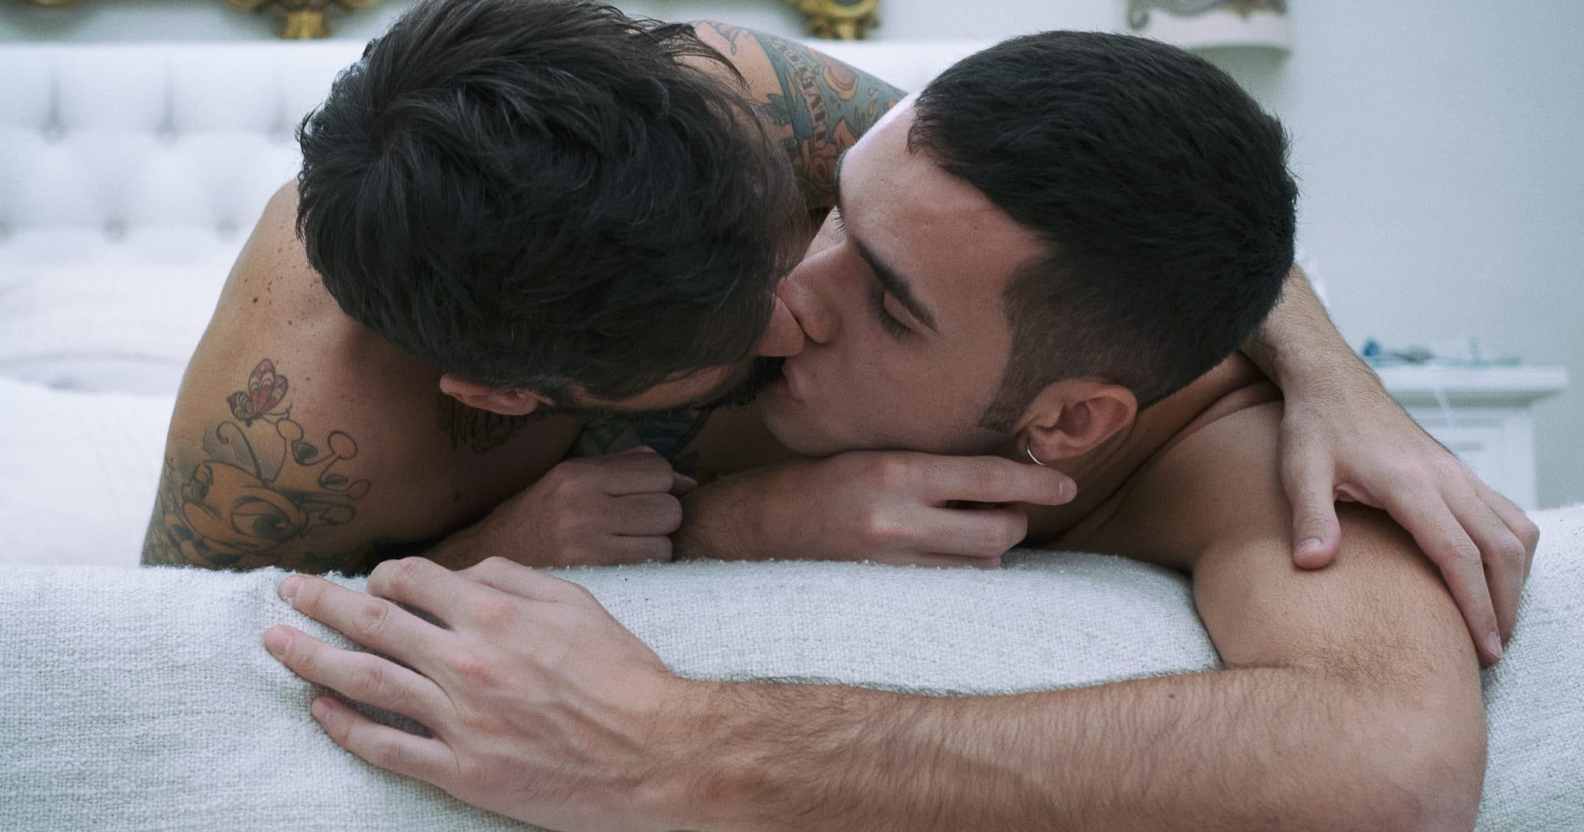 Besbion - Gay porn: I'm a lesbian who loves gay male porn. Here's why